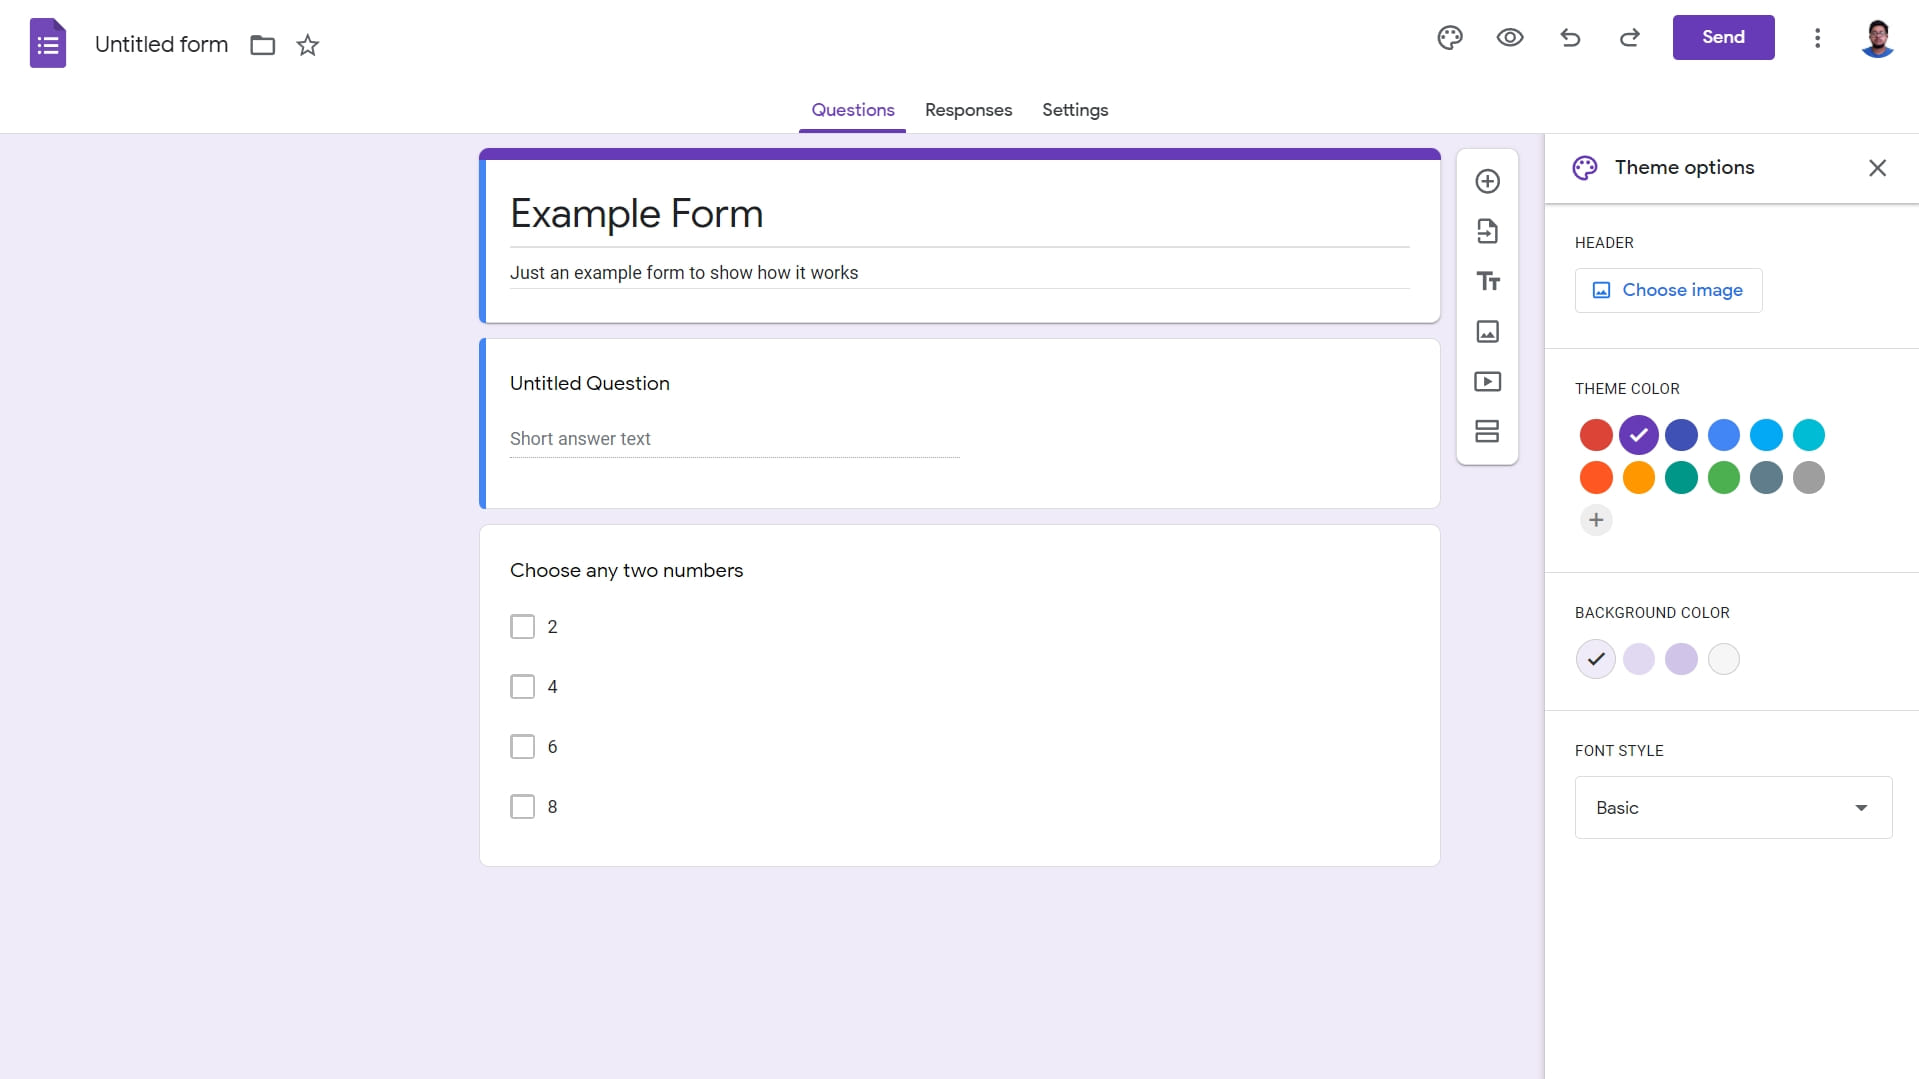 Despite being a free tool, Google Forms offers some customisation options